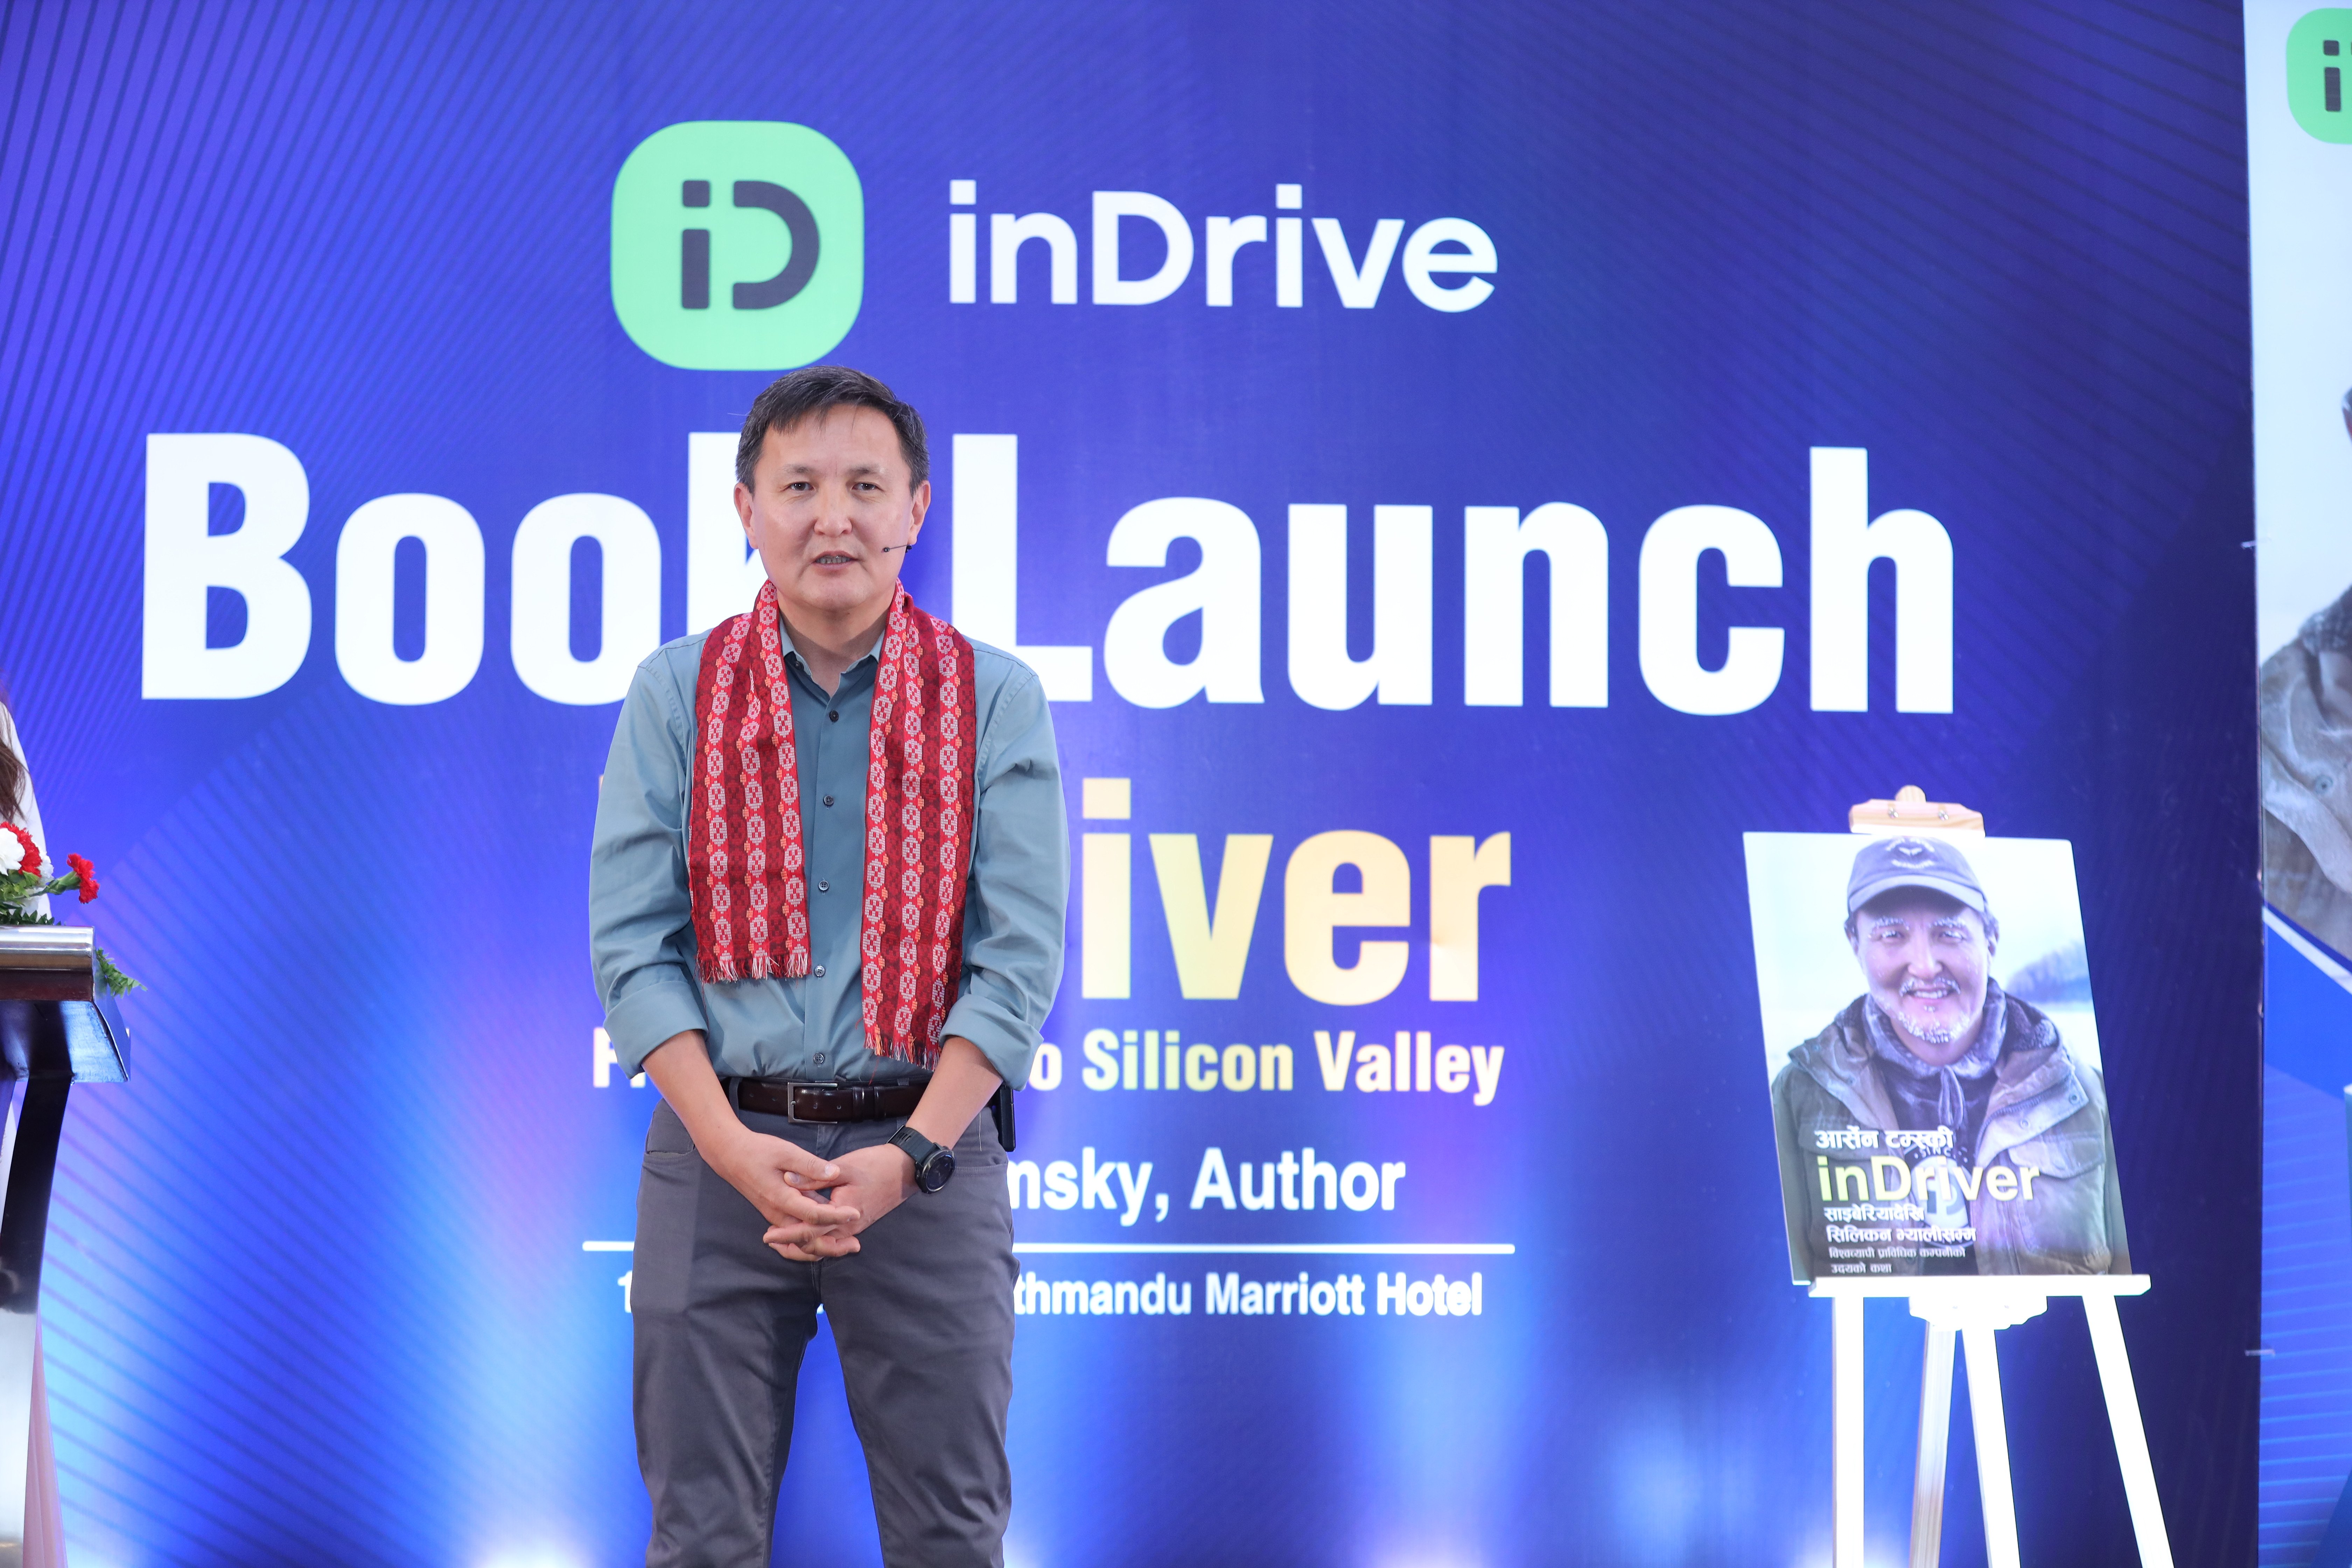 indrive book